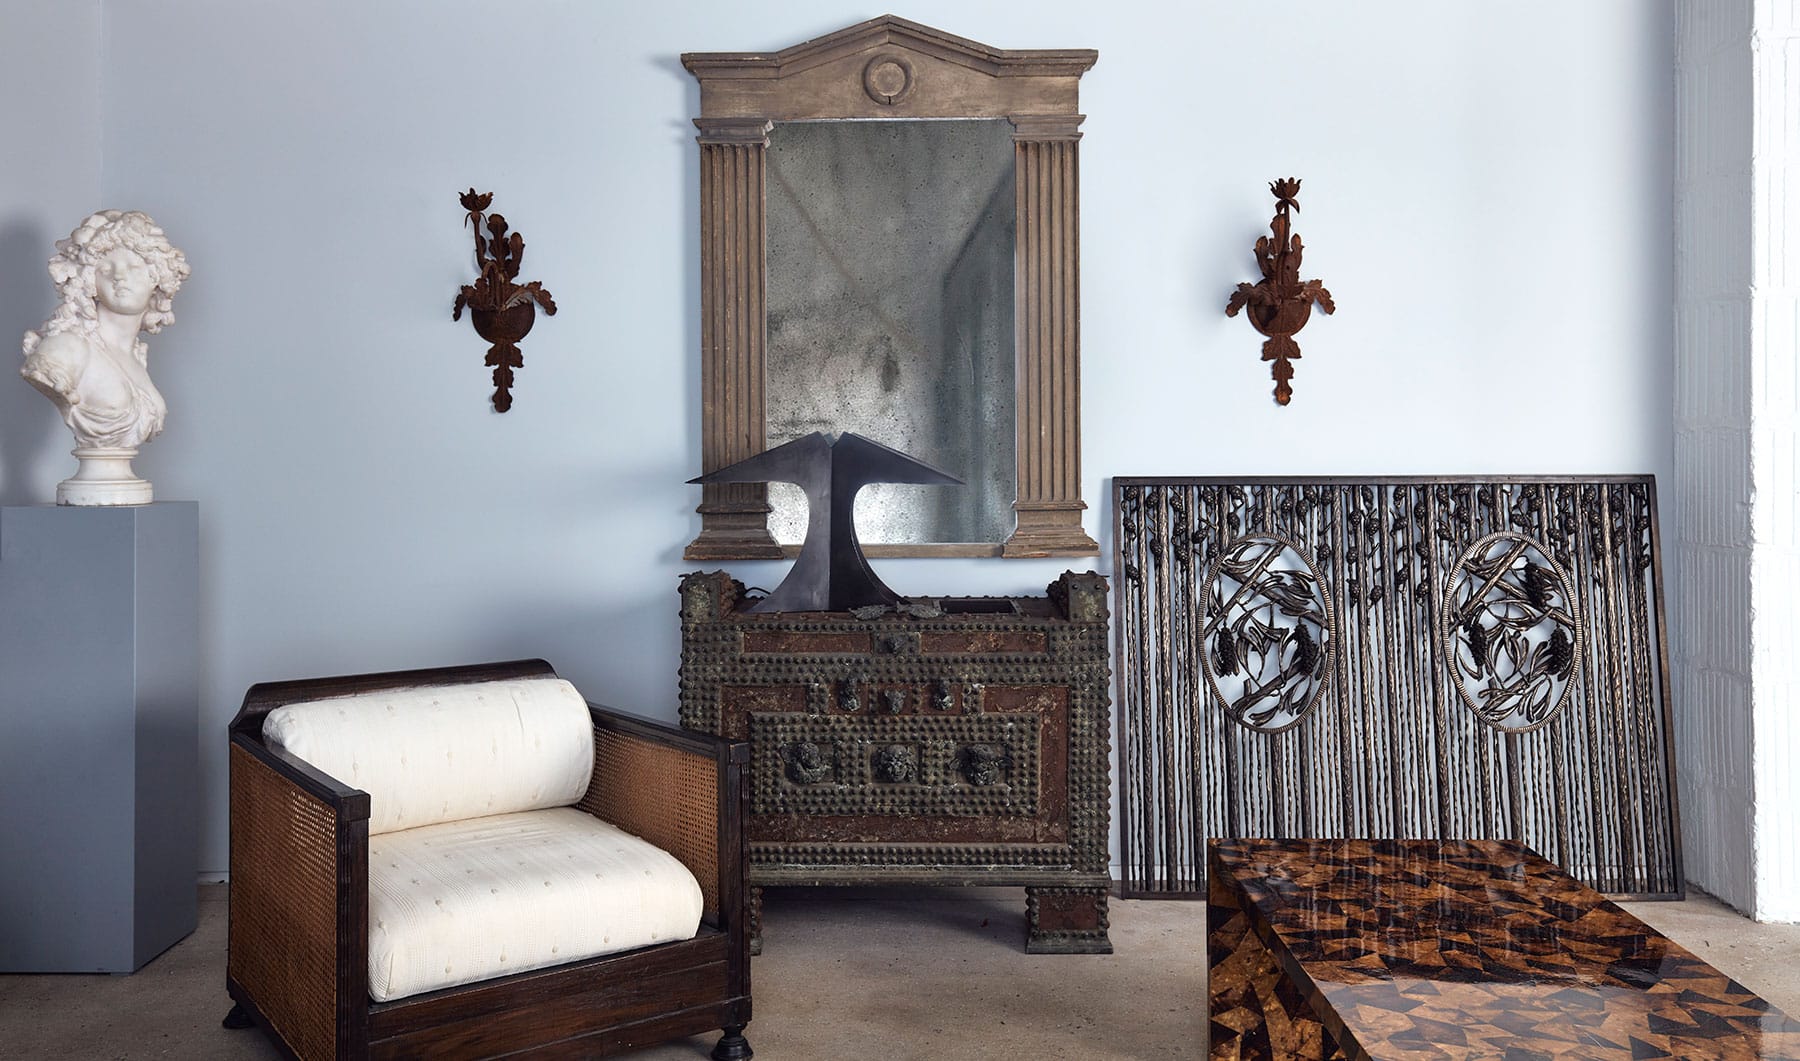 See and Shop Juan Montoya’s Carefully Curated Christie’s Exhibition at the 1stdibs Gallery